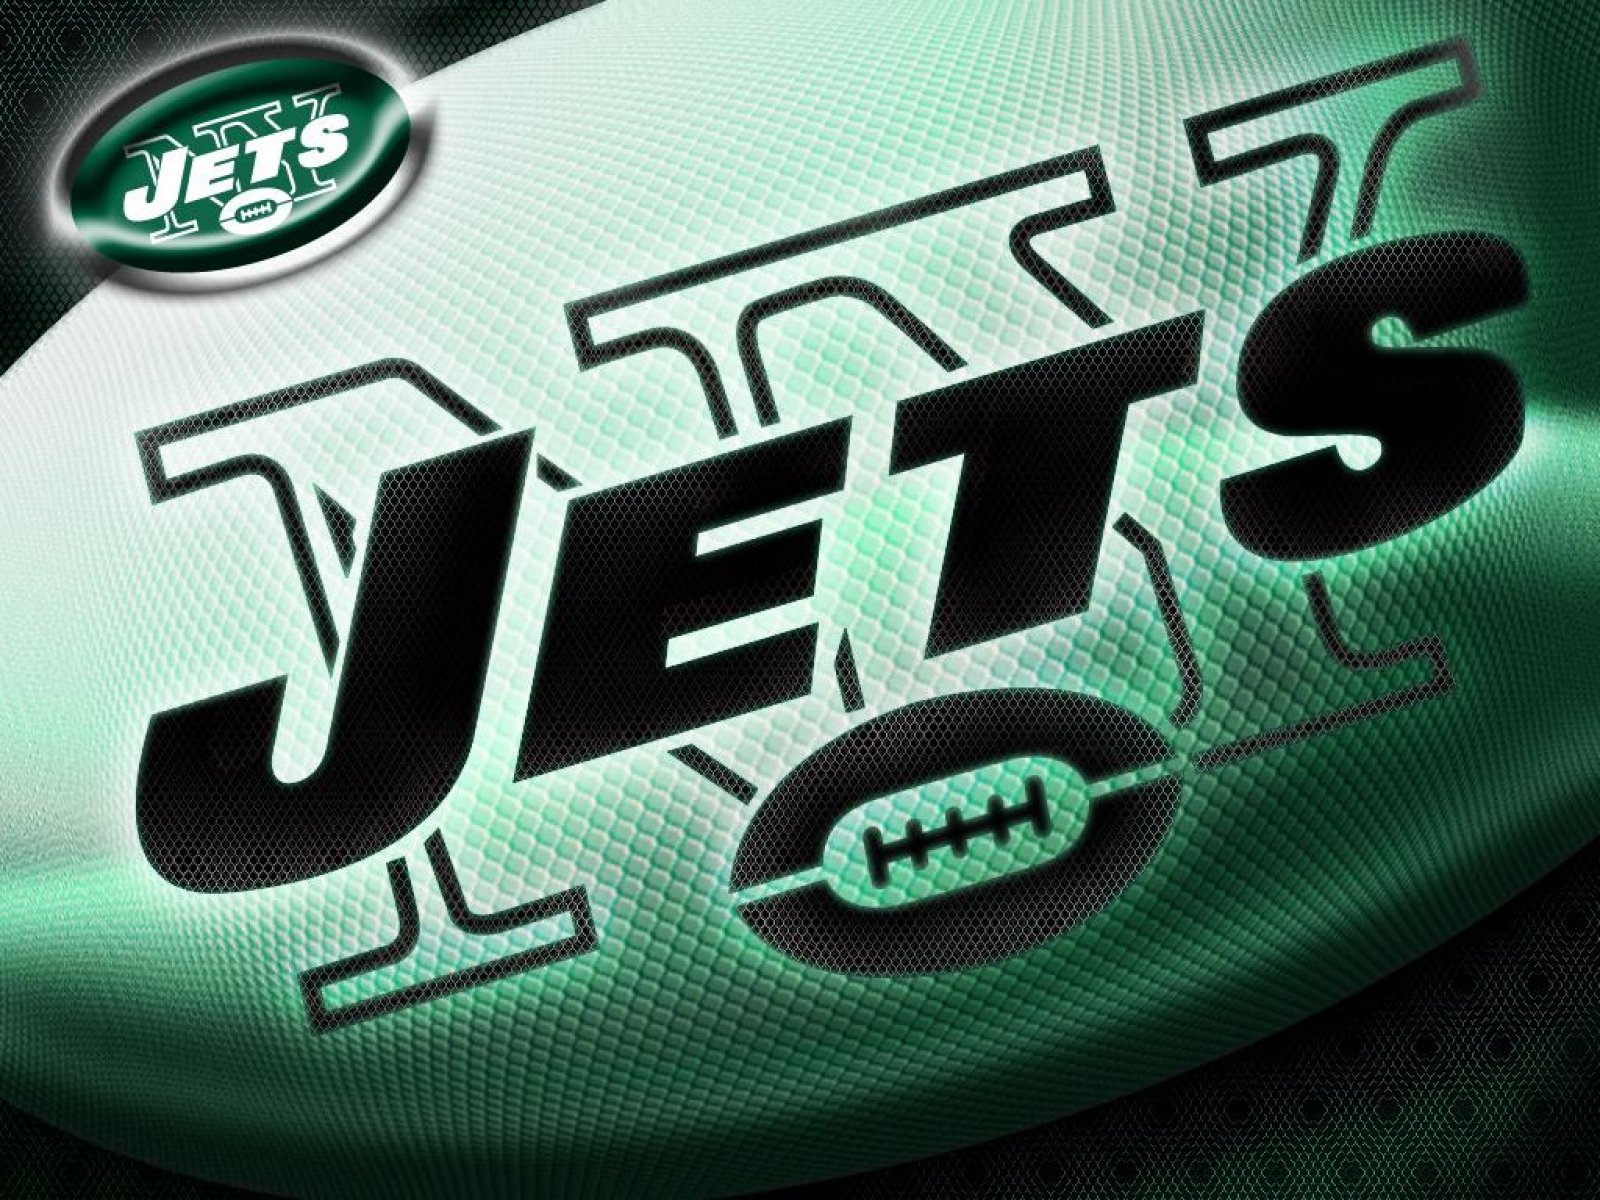 Free New York Jets wallpaper New York Jets wallpapers